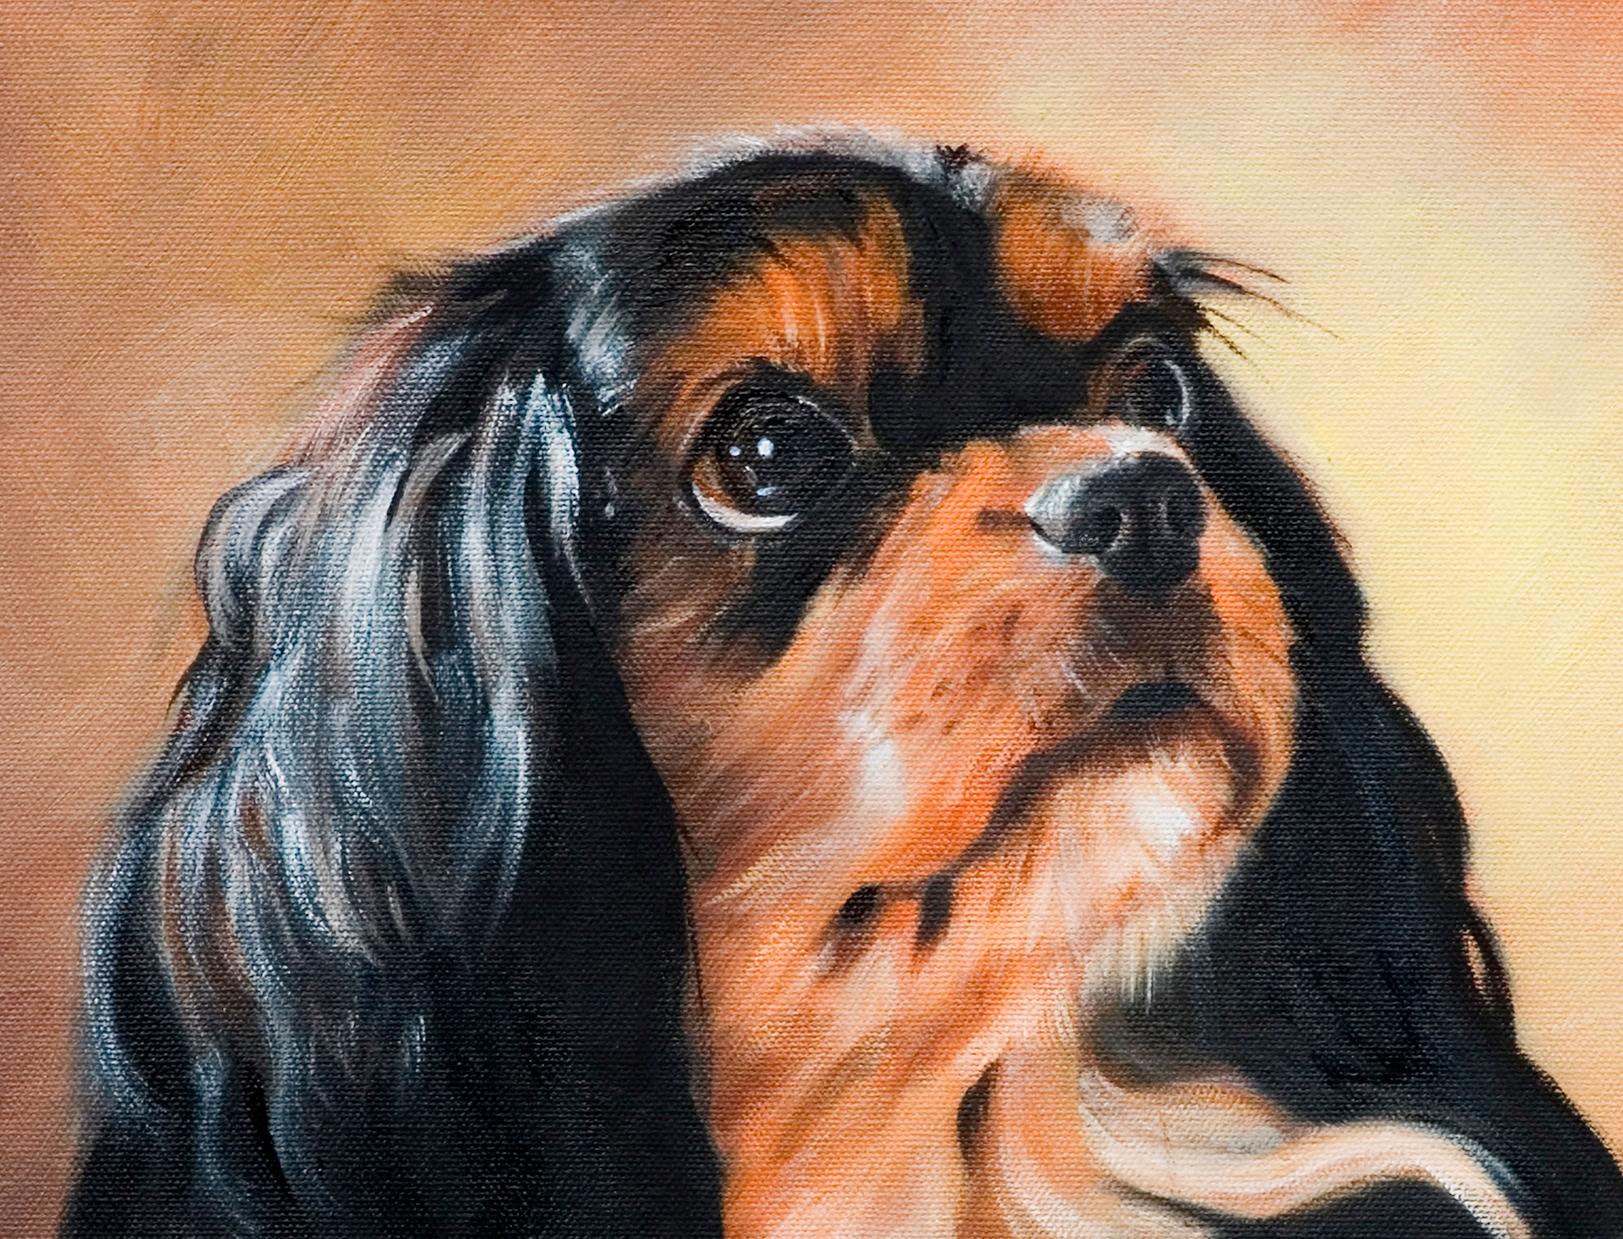 Romantic Cavalier King Charles Spaniel dog painting bathed in Caravaggio light - Painting by Faith Cameron Semmes